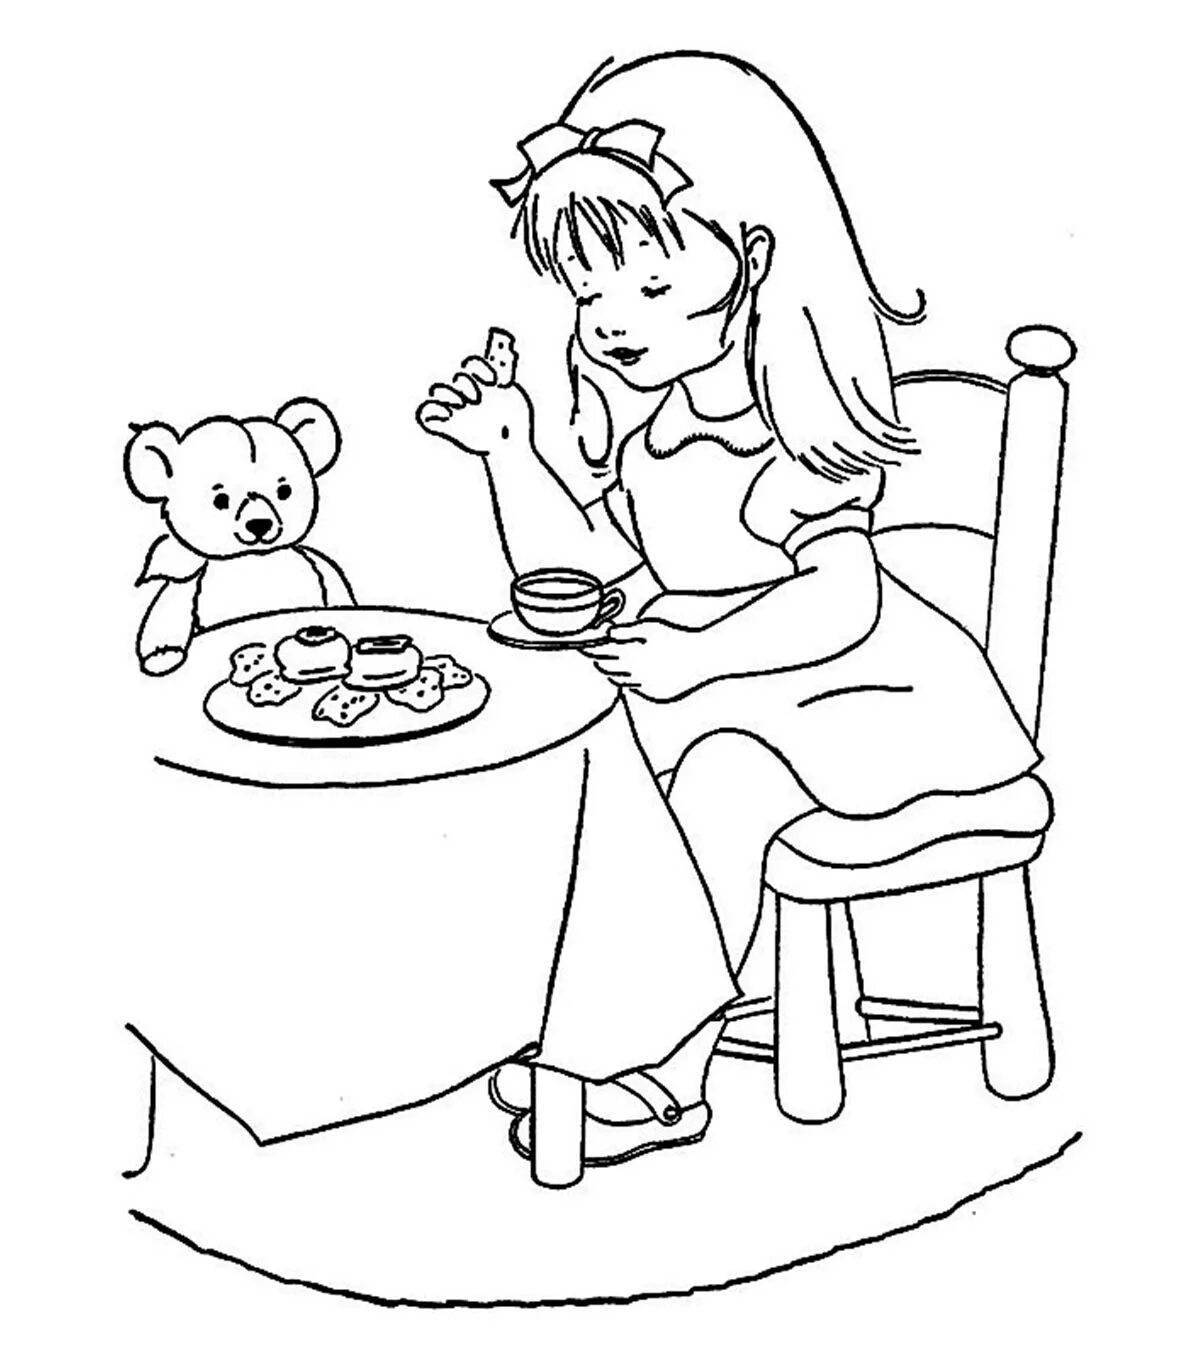 Bright table manners coloring design